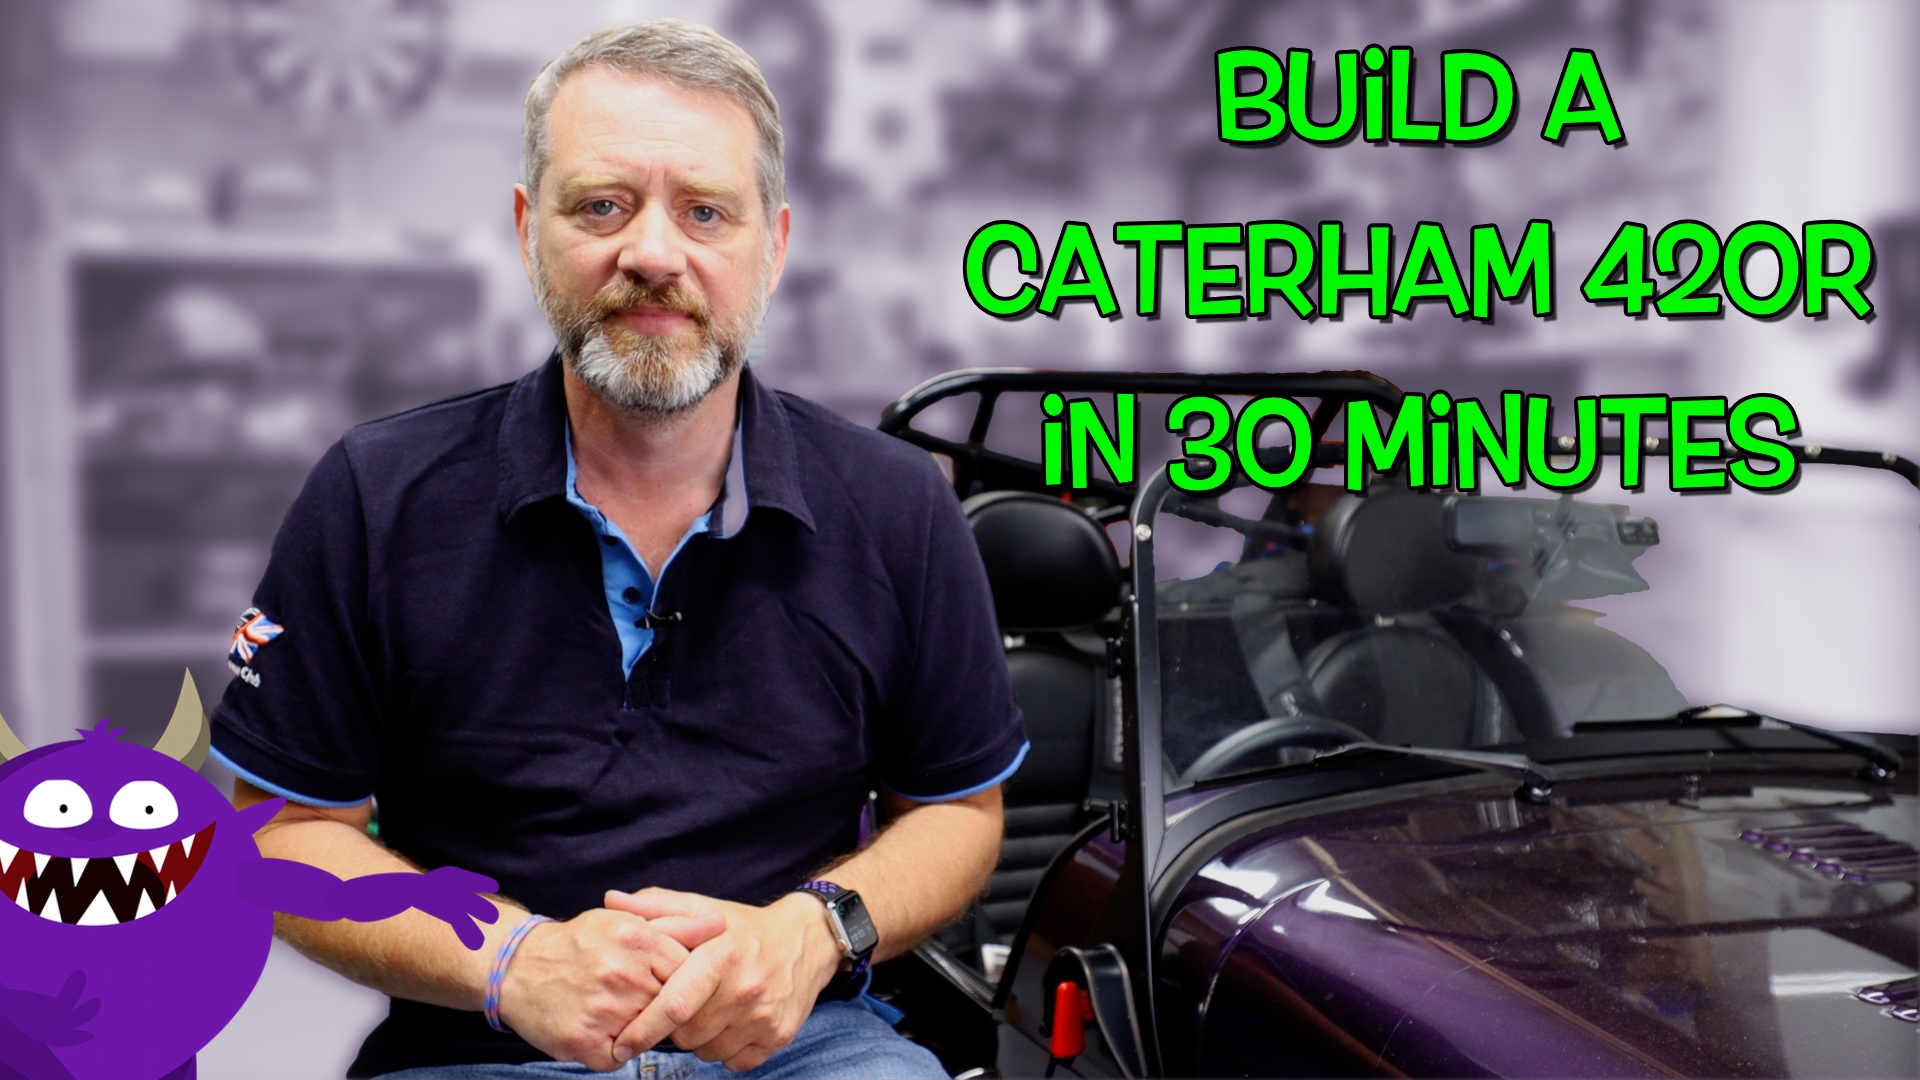 Build A Caterham 420R in 30 Minutes – YouTube Video